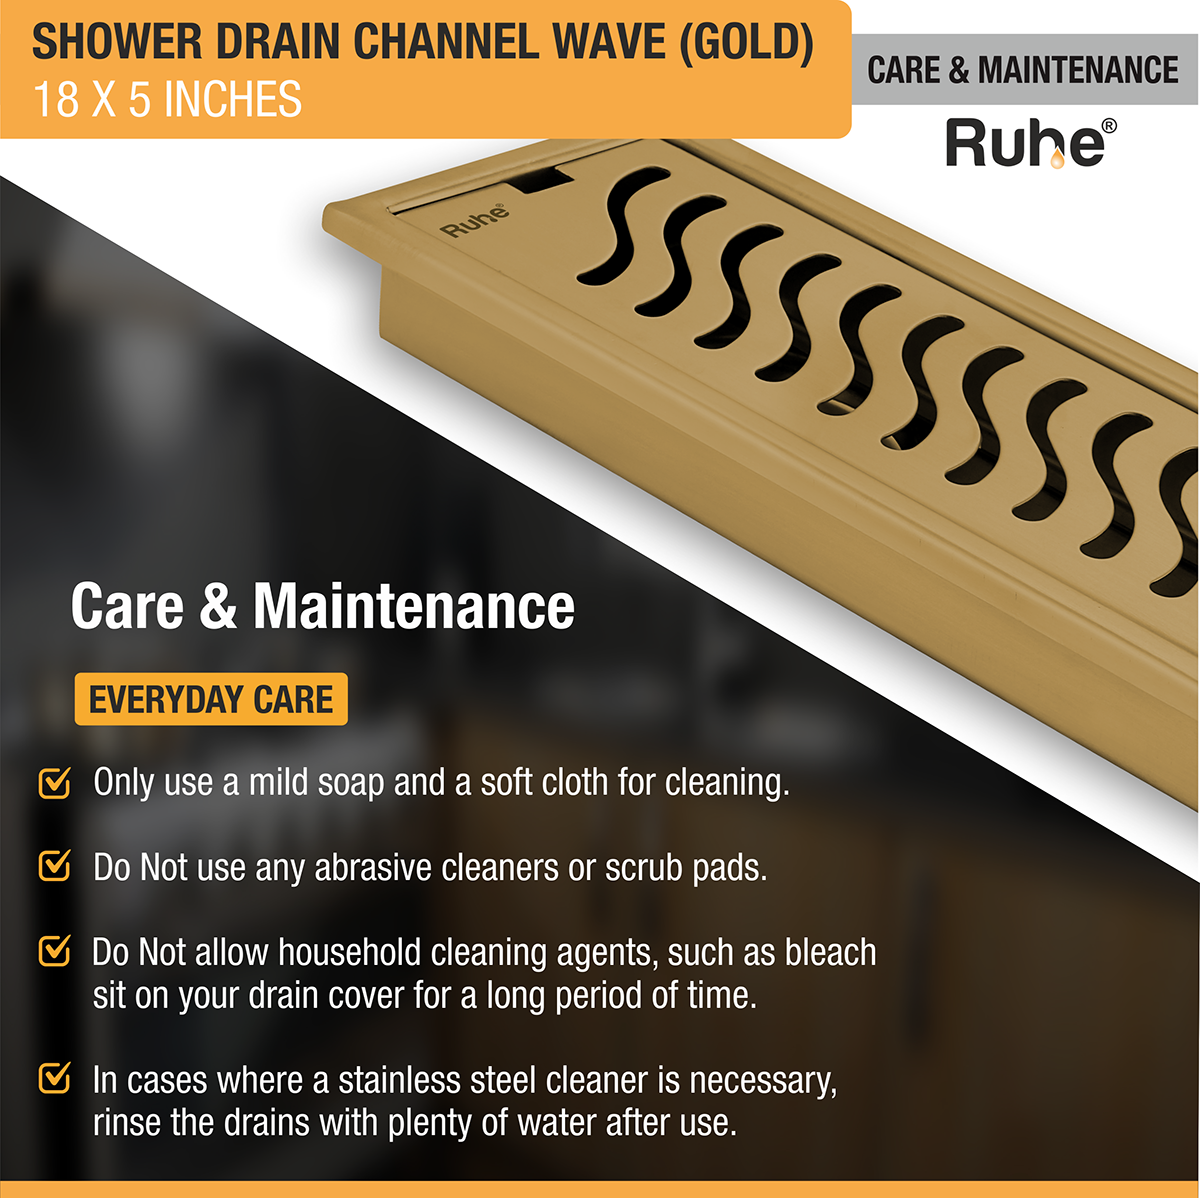 Wave Shower Drain Channel (18 x 5 Inches) YELLOW GOLD care and maintenance